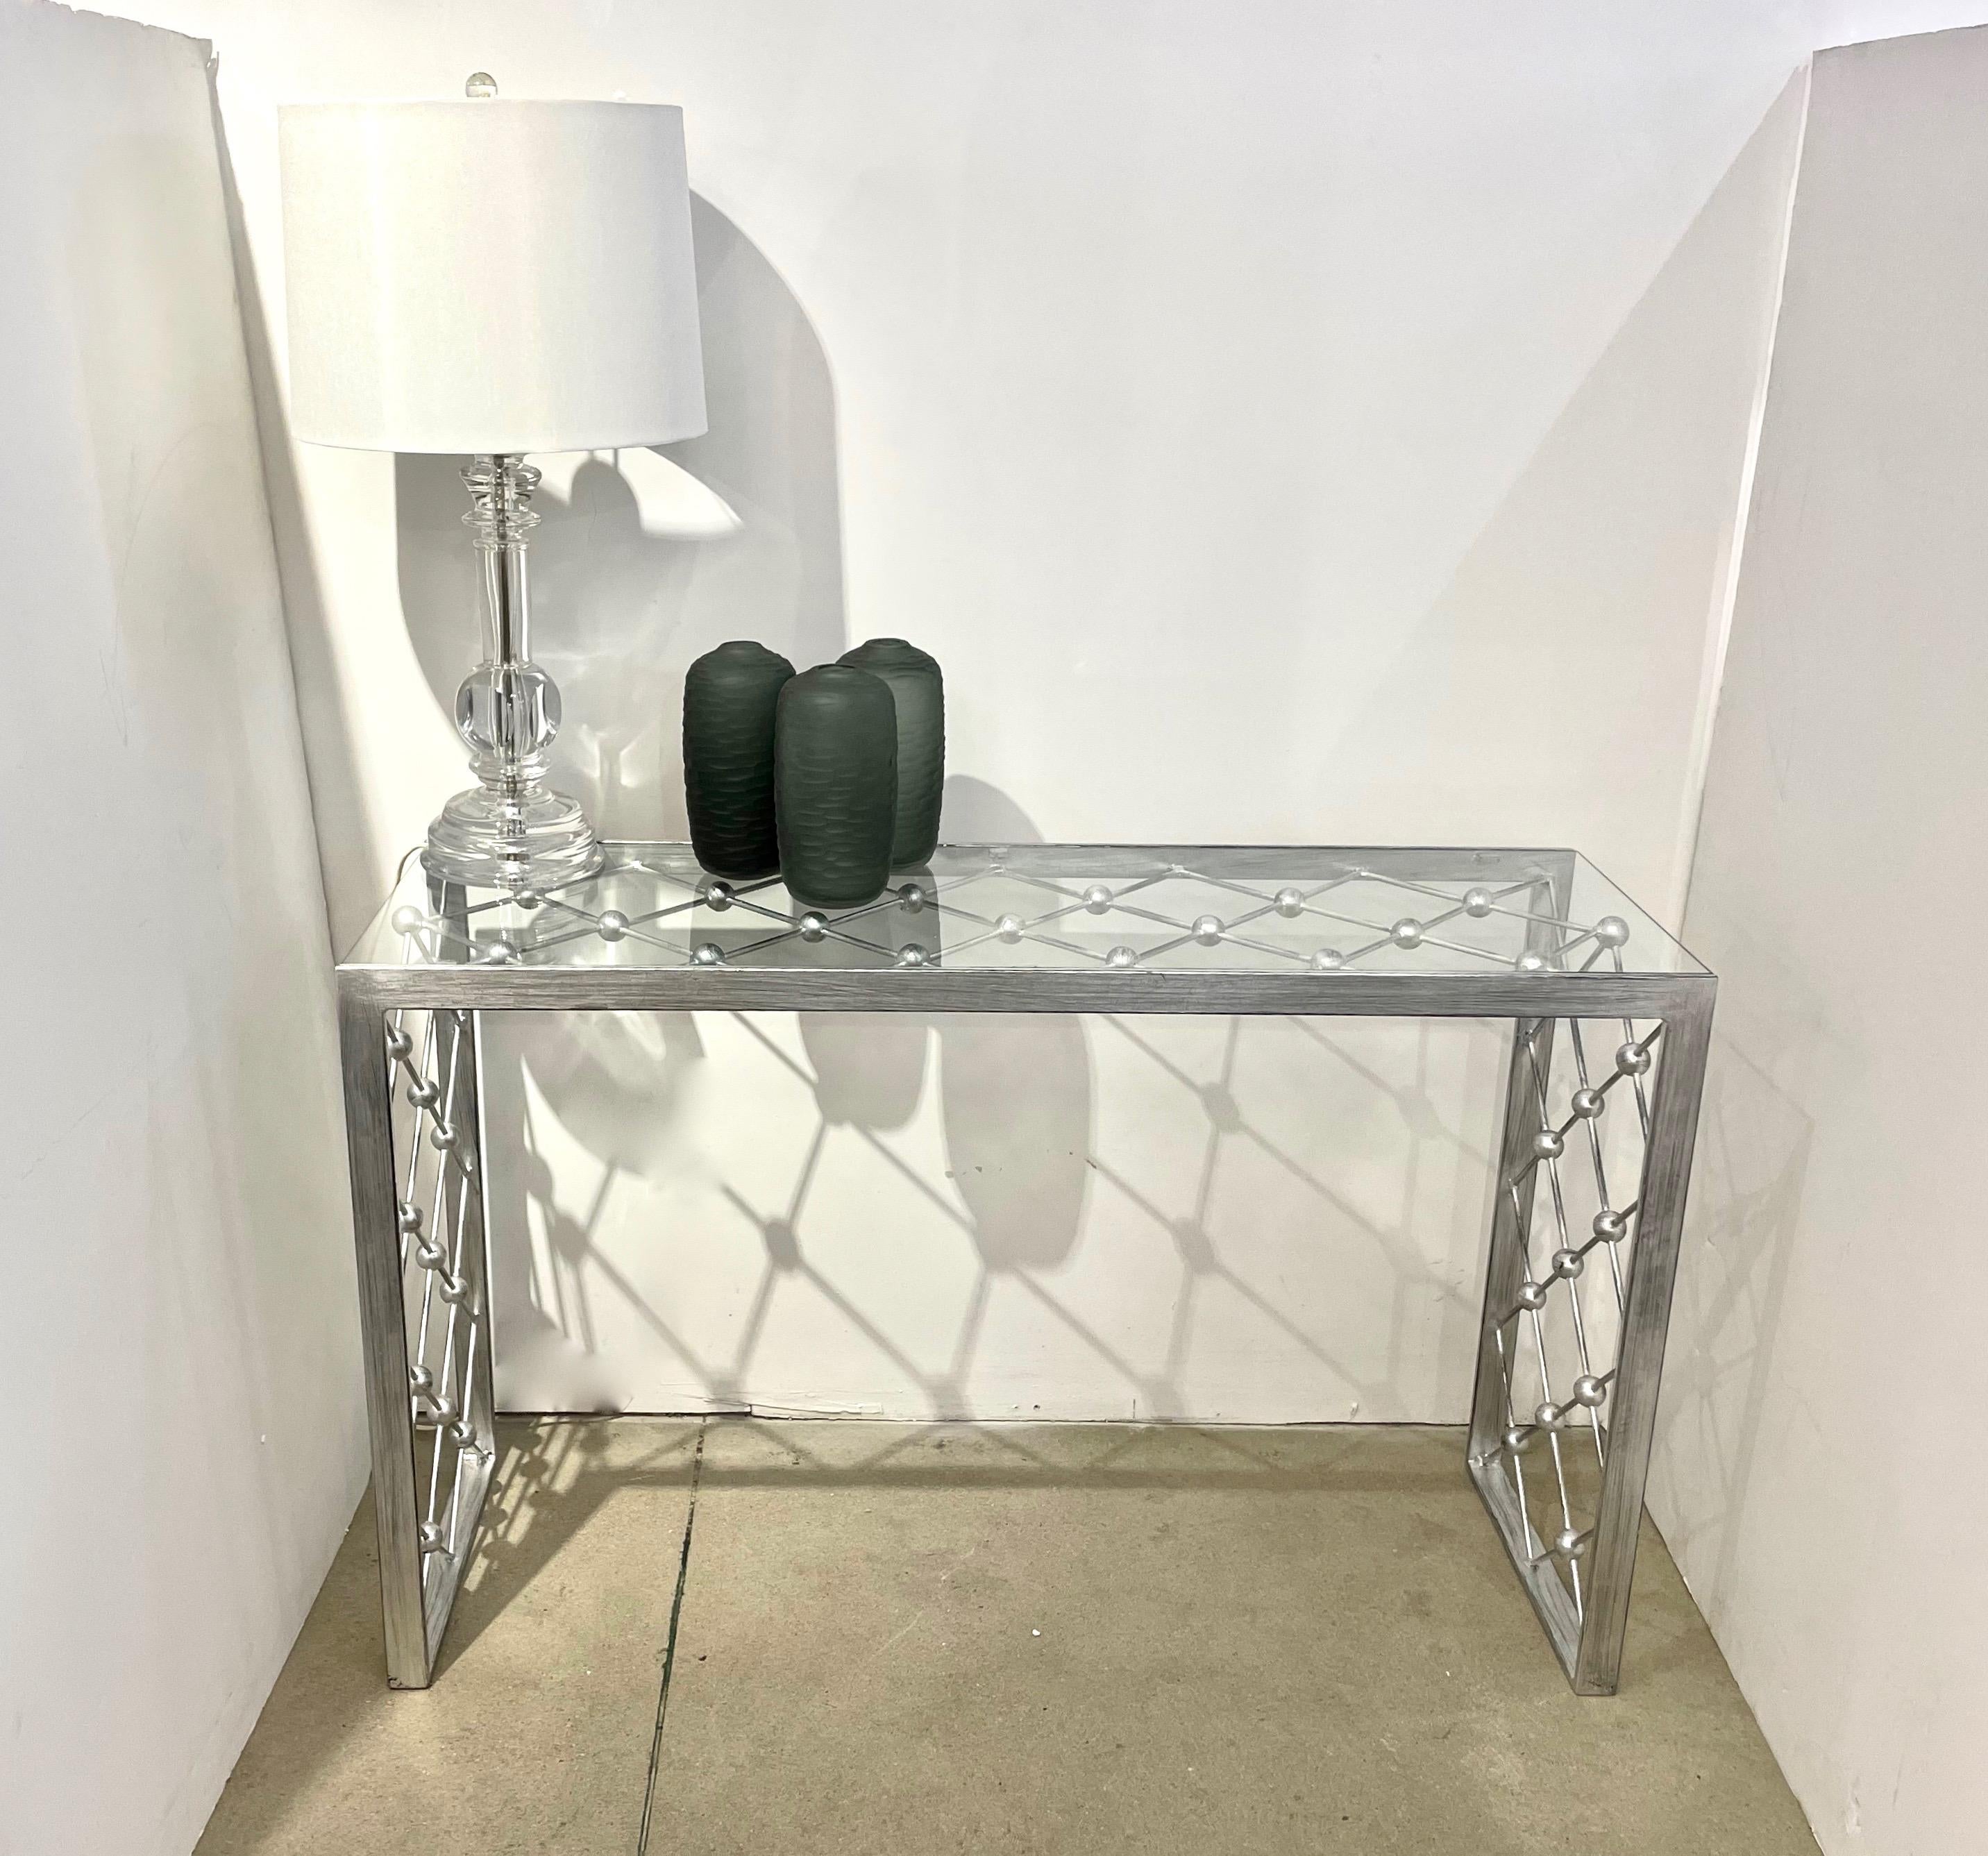 Italian Modern Industrial Design Criss Cross Fretwork Iron Console / Entry Table For Sale 9